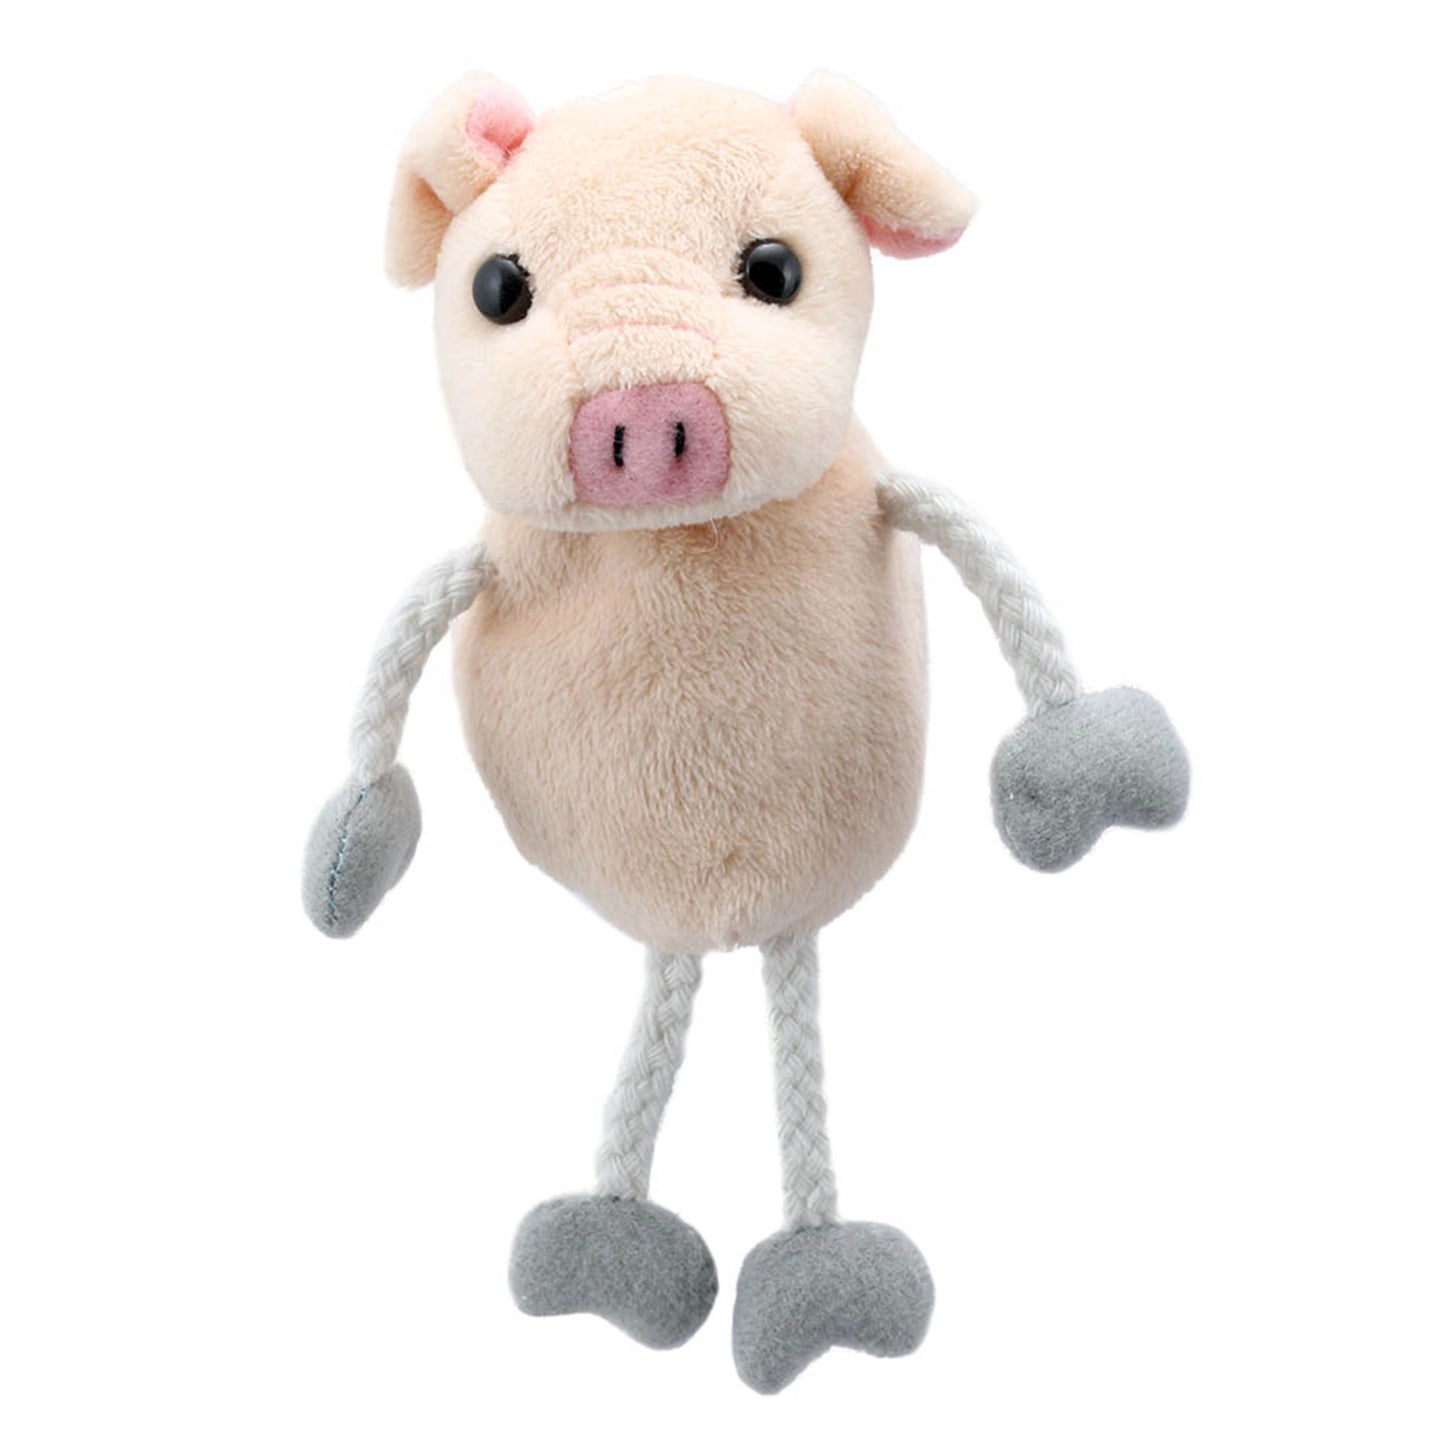 Pig Finger Puppet - The Puppet Company - The Forgotten Toy Shop